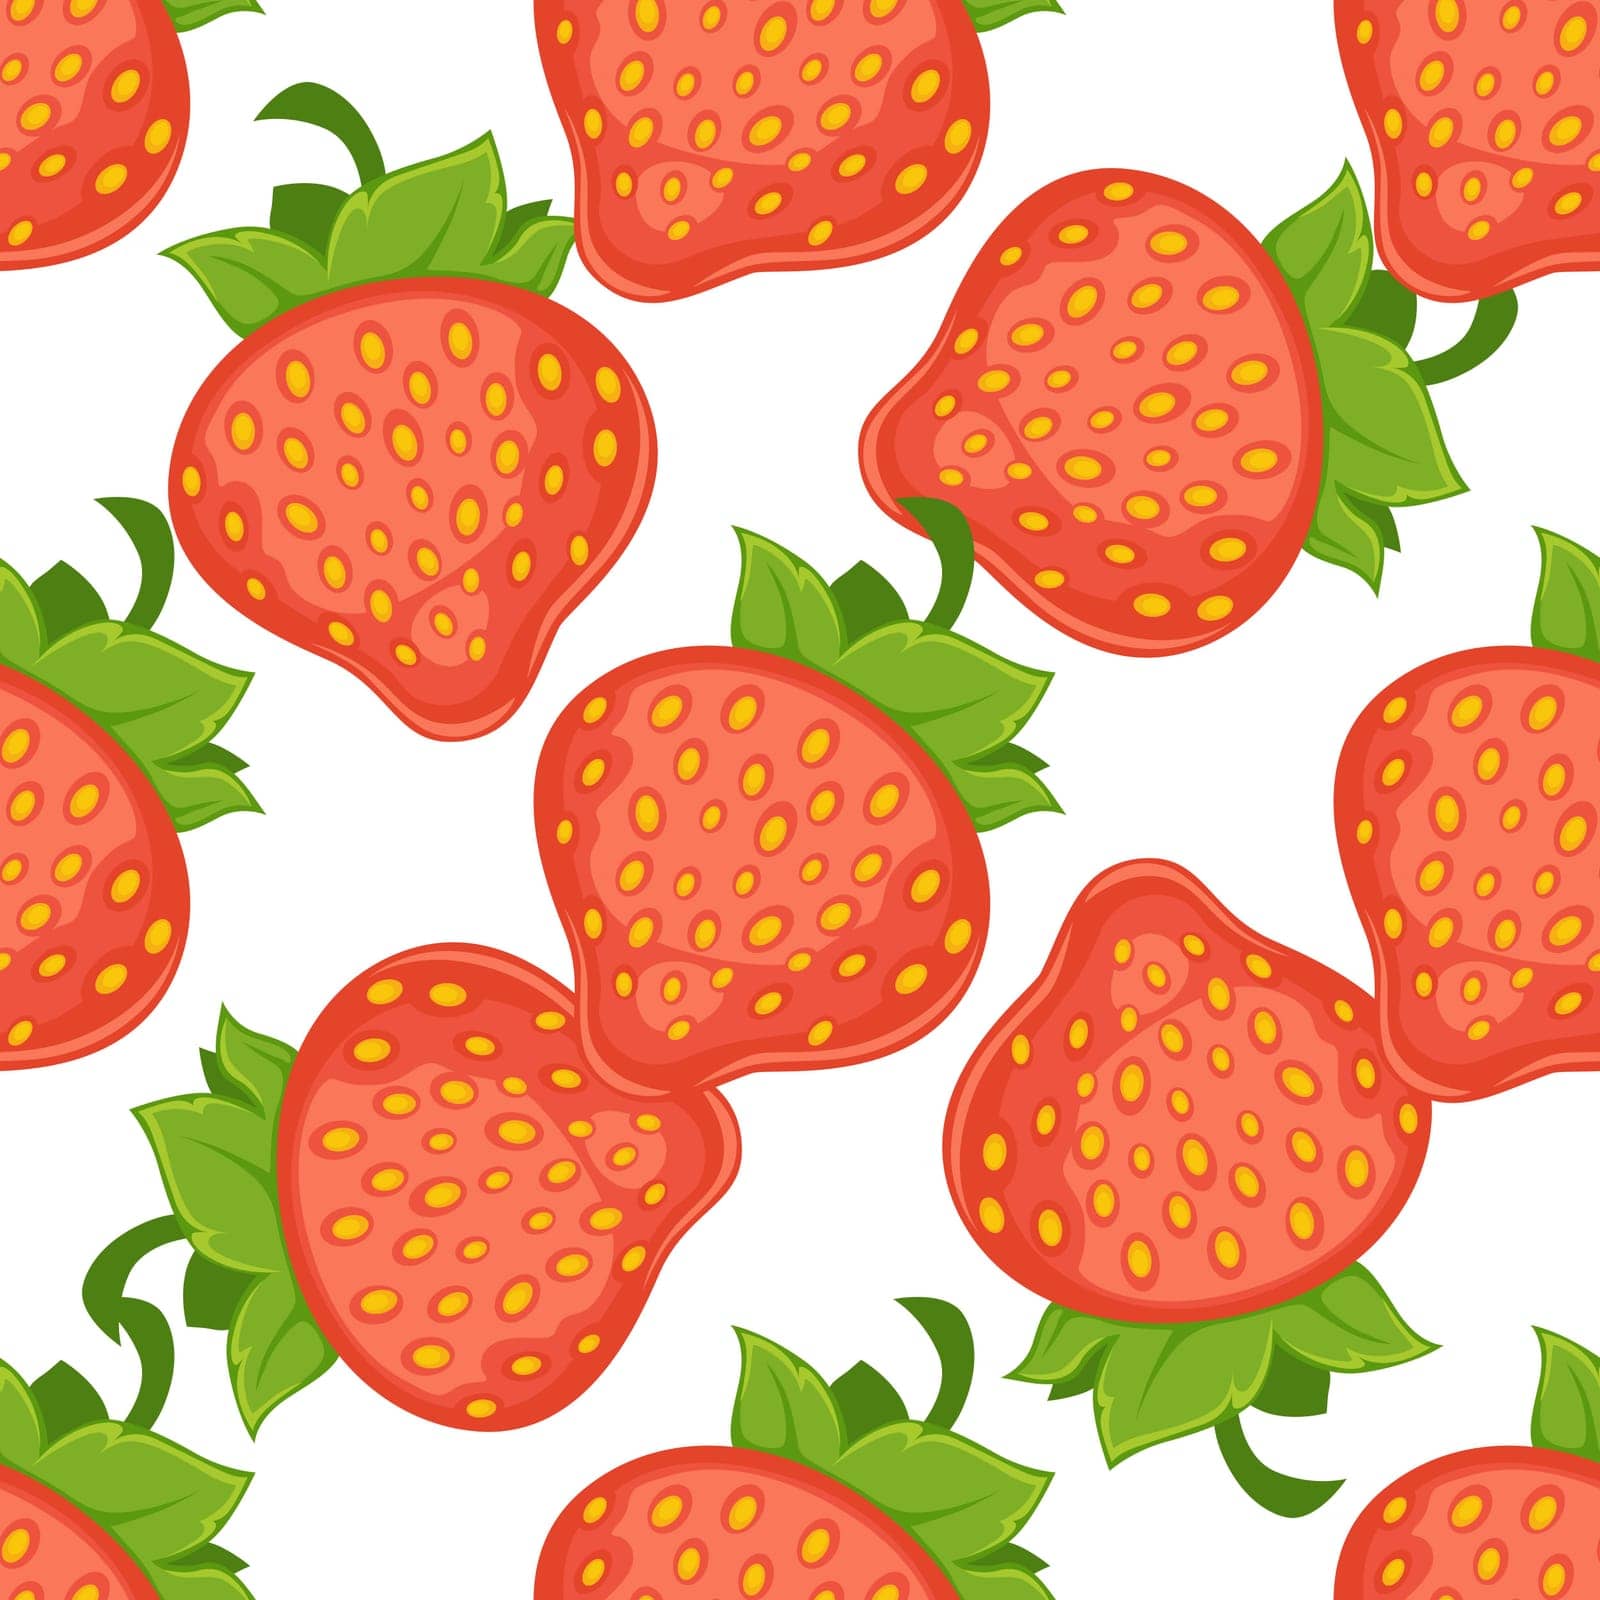 Cute seamless pattern with red strawberries by Sonulkaster